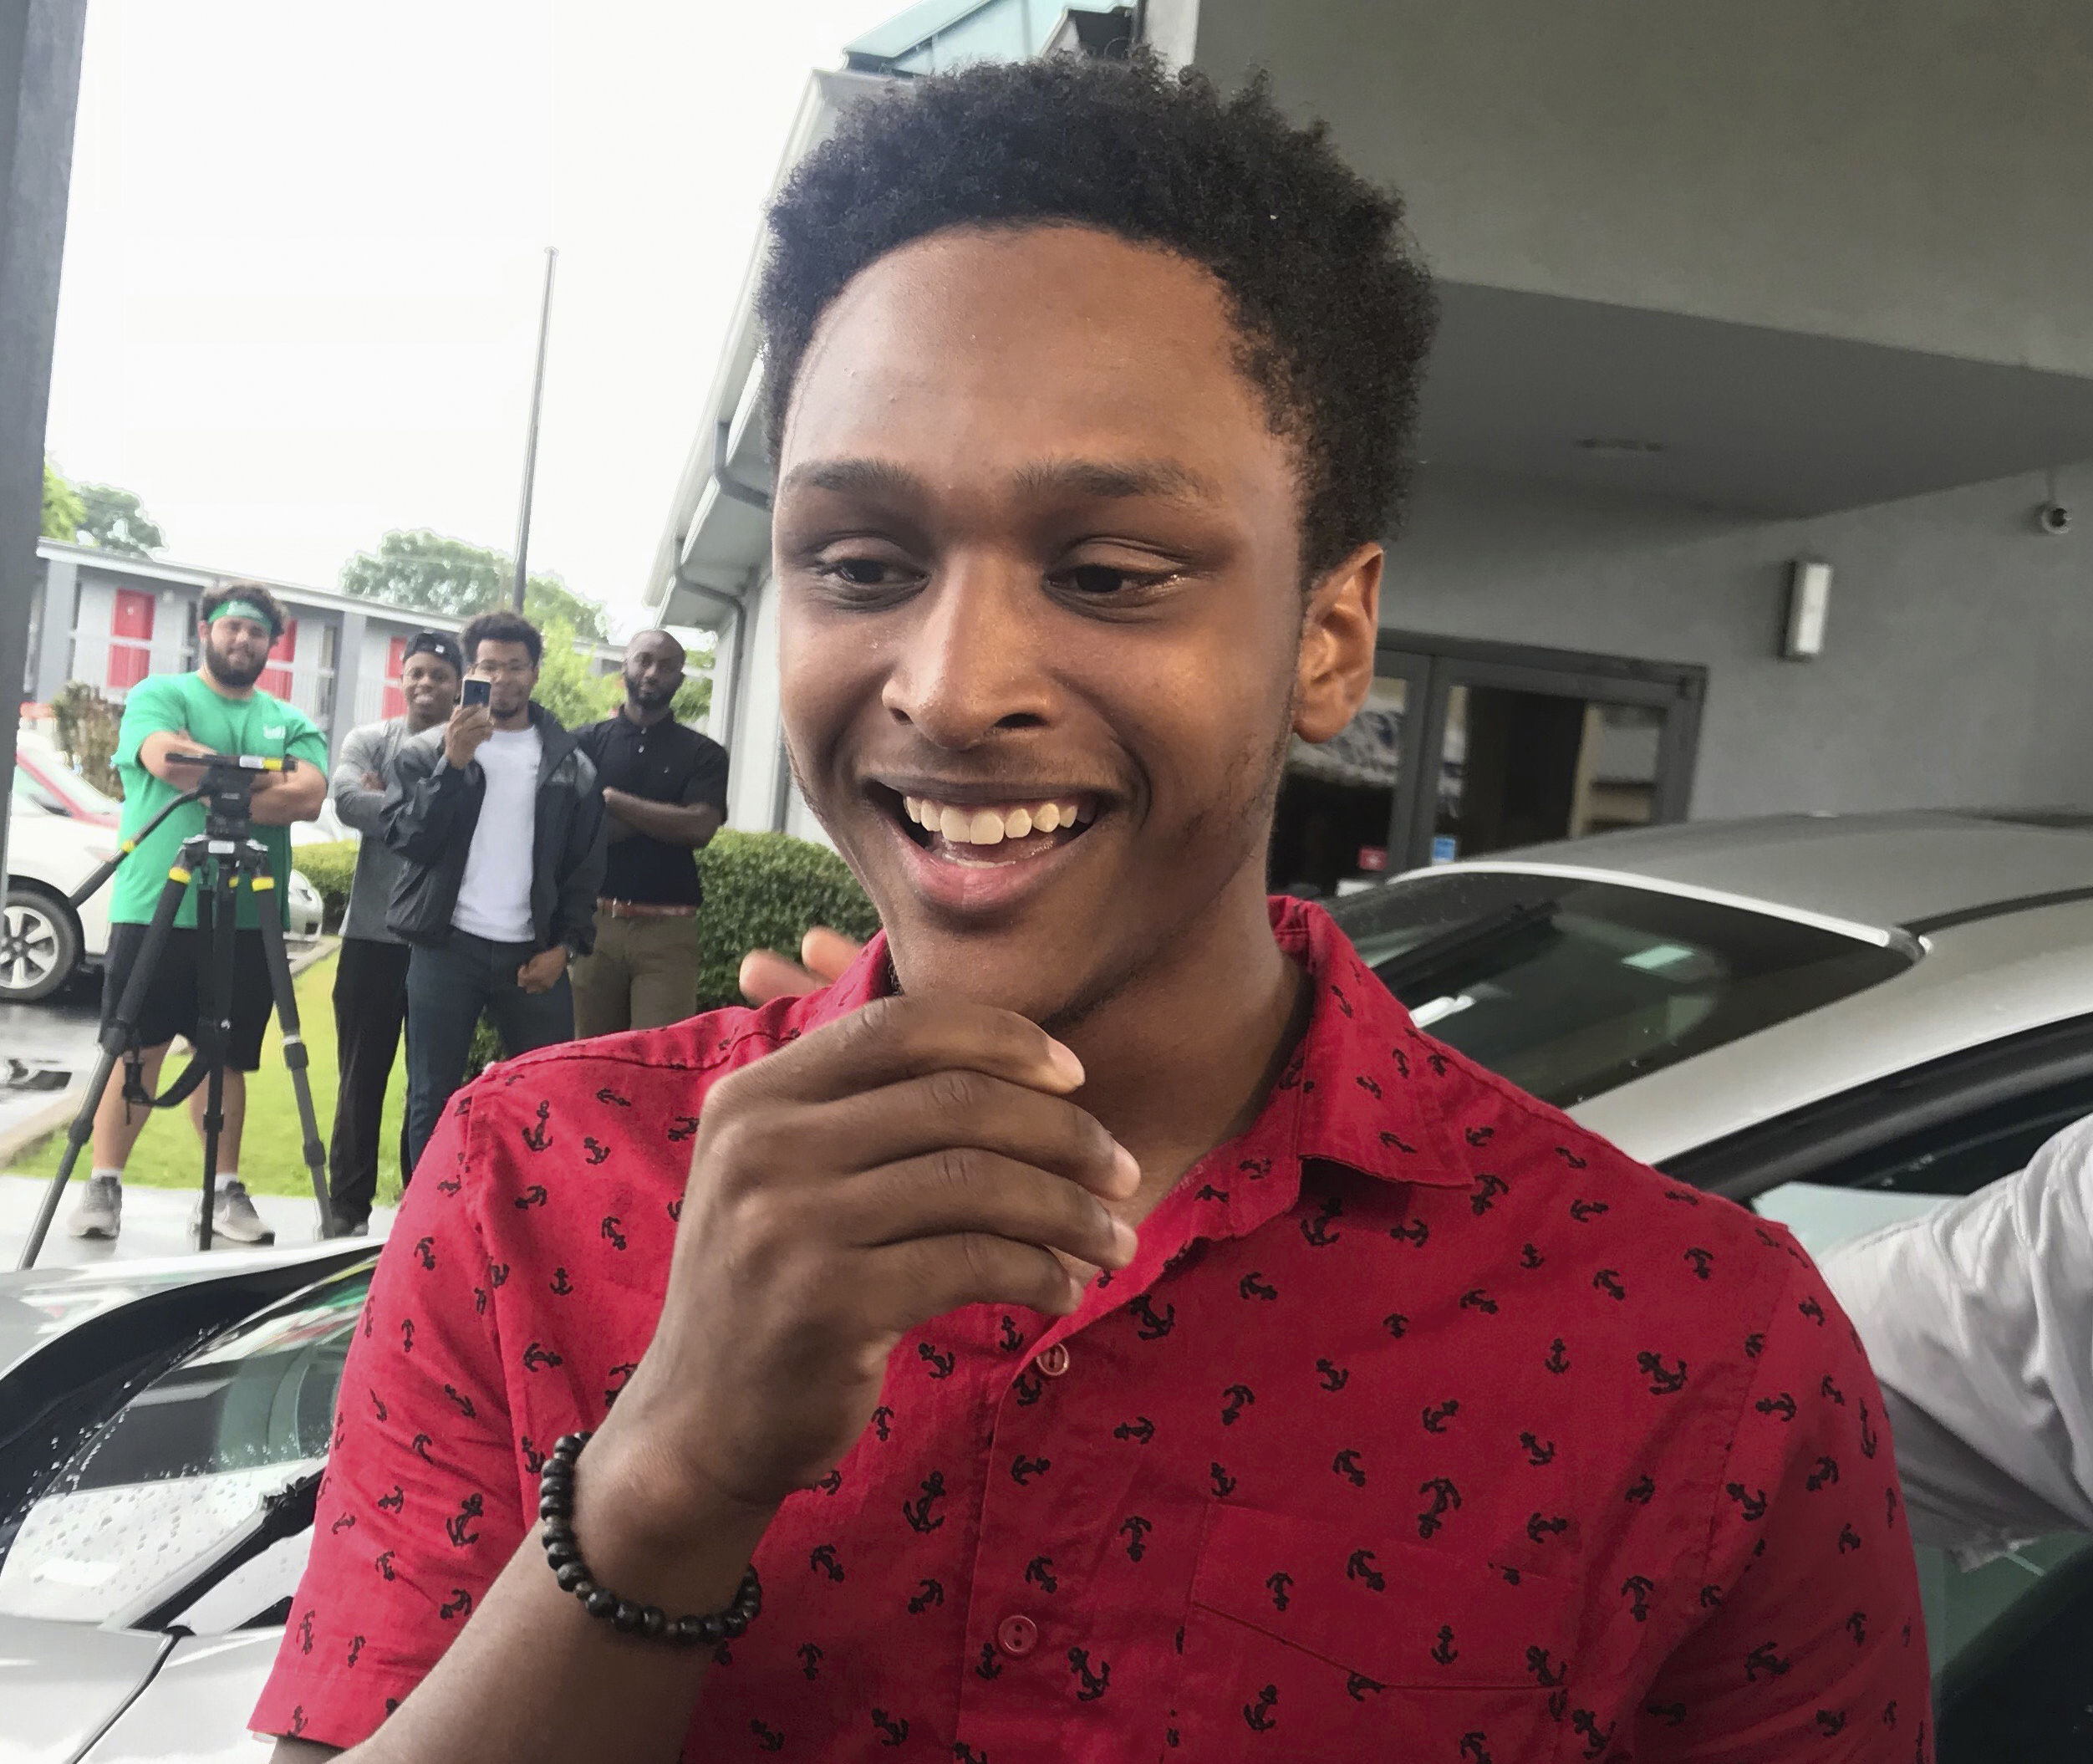 PHOTO: Alabama college student Walter Carr reacts after being given a new car by Bellhops CEO Luke Marklin in Pelham, Ala., July 16, 2018. Carr's car broke down just before his first day of work made the 20-mile journey on foot.